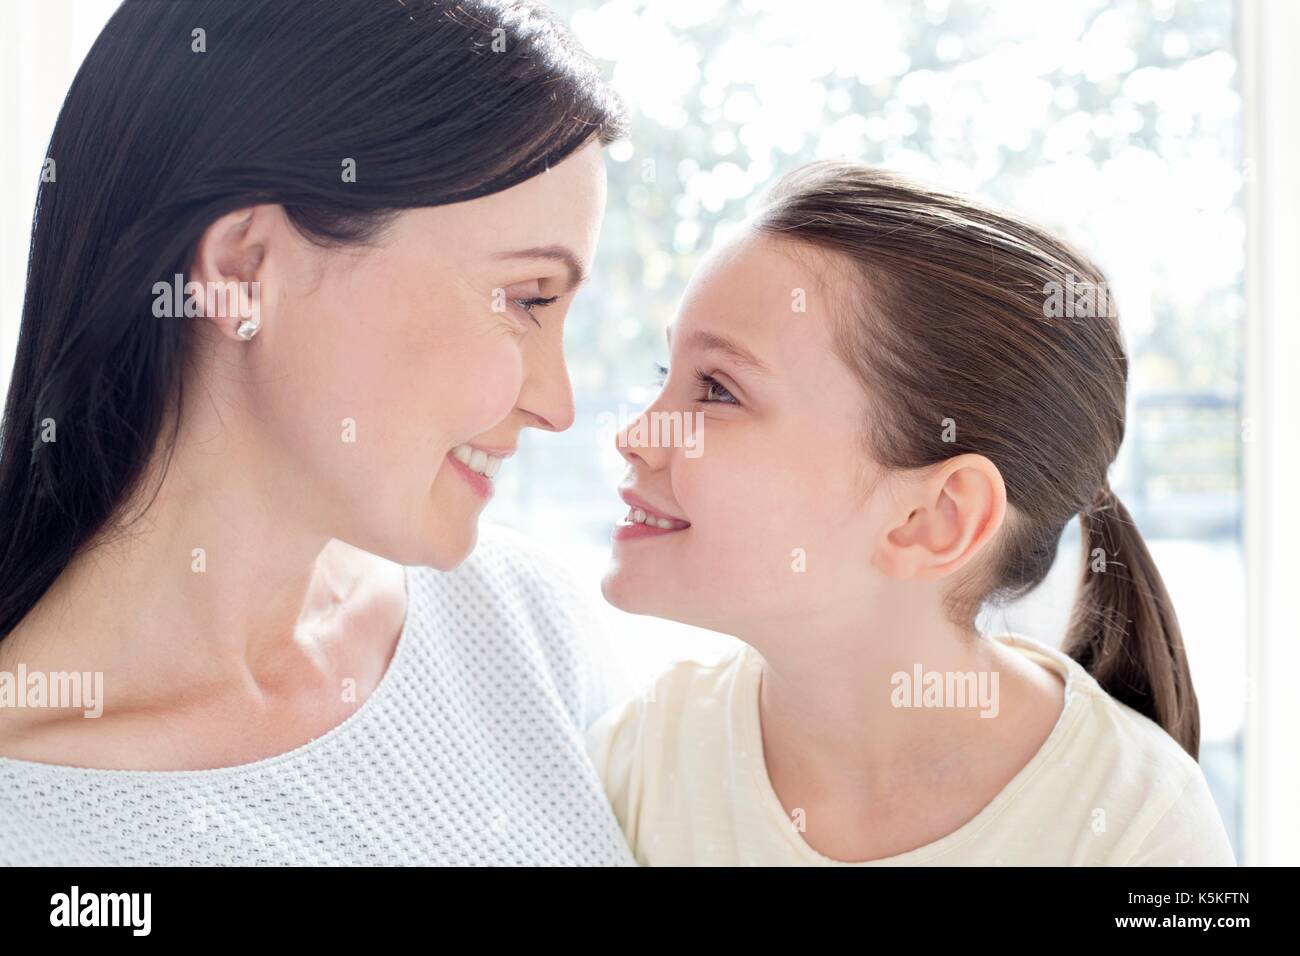 Mother and daughter face to face, smiling. Stock Photo